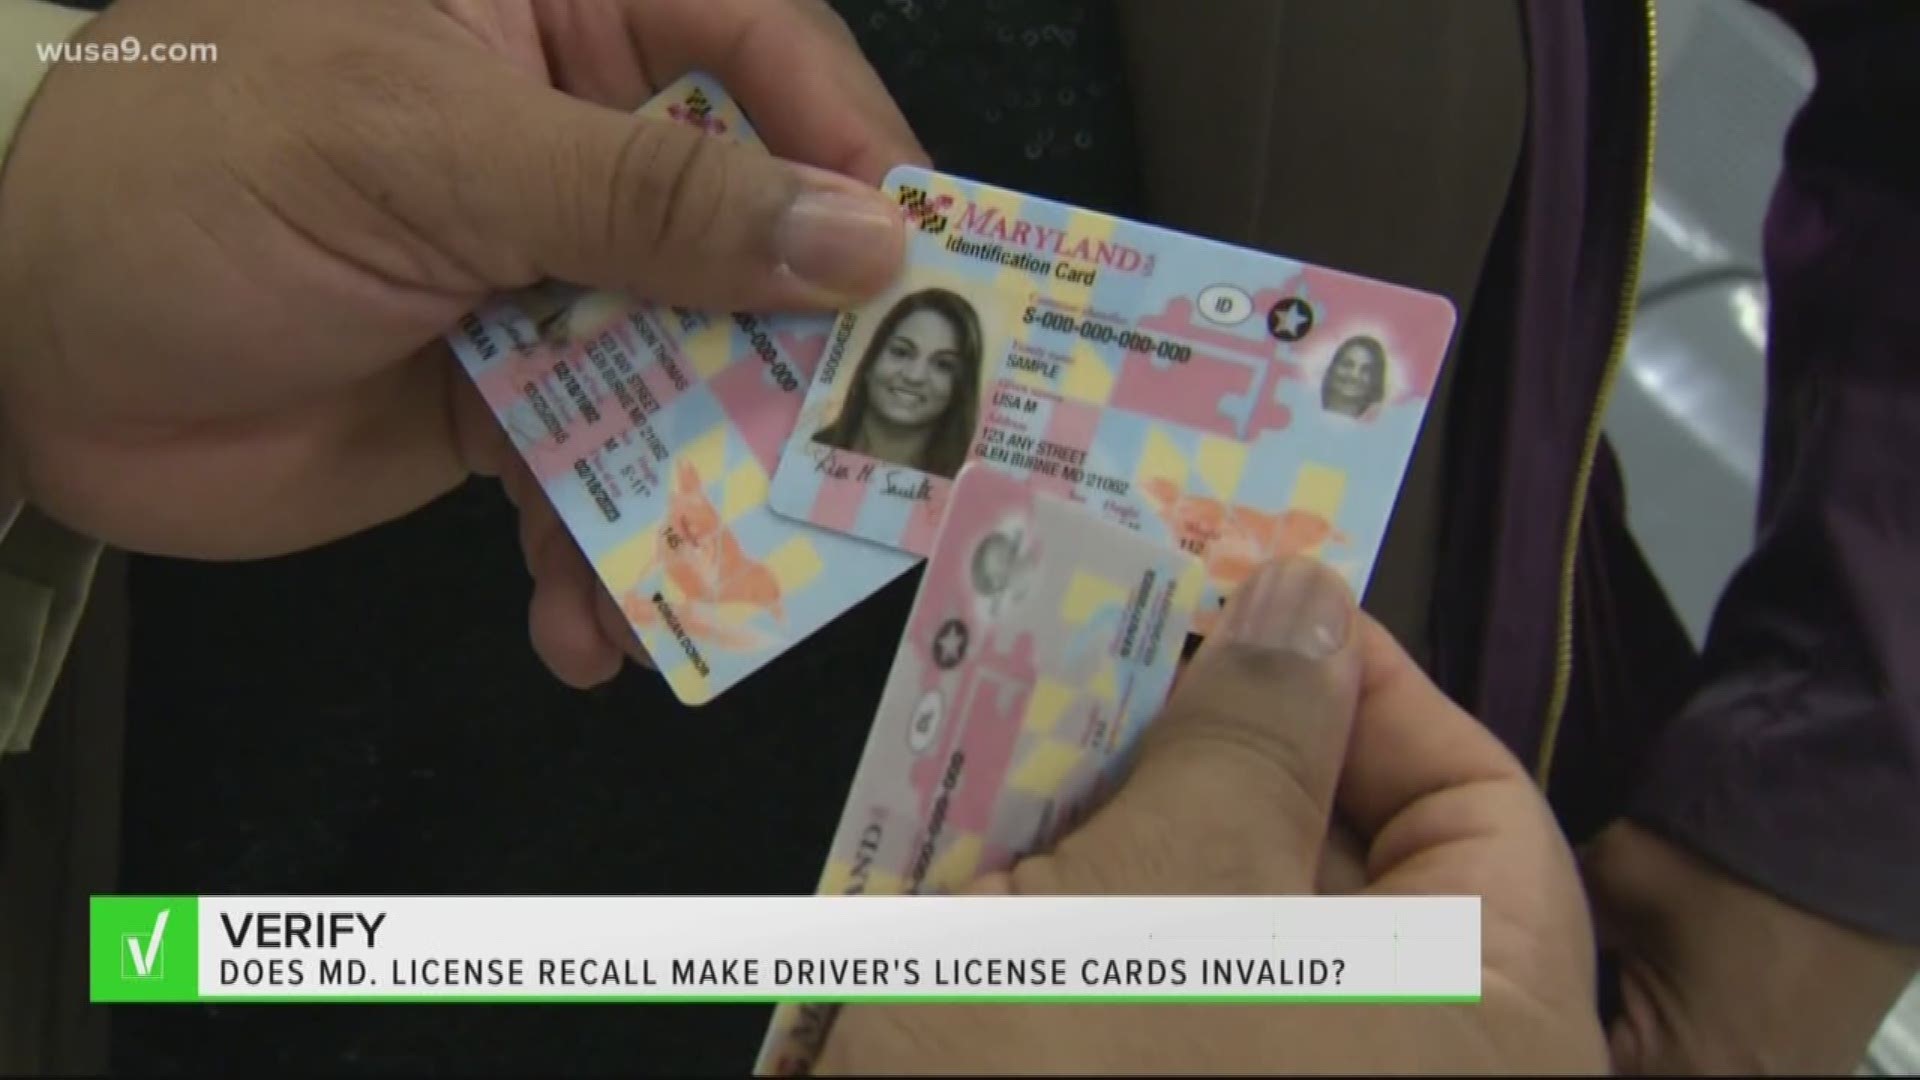 Thousands of people are rushing to get required documents needed for the Real ID driver's license in Maryland.
If you don't do it -- your current license could be recalled. But what exactly does that recall mean for you?